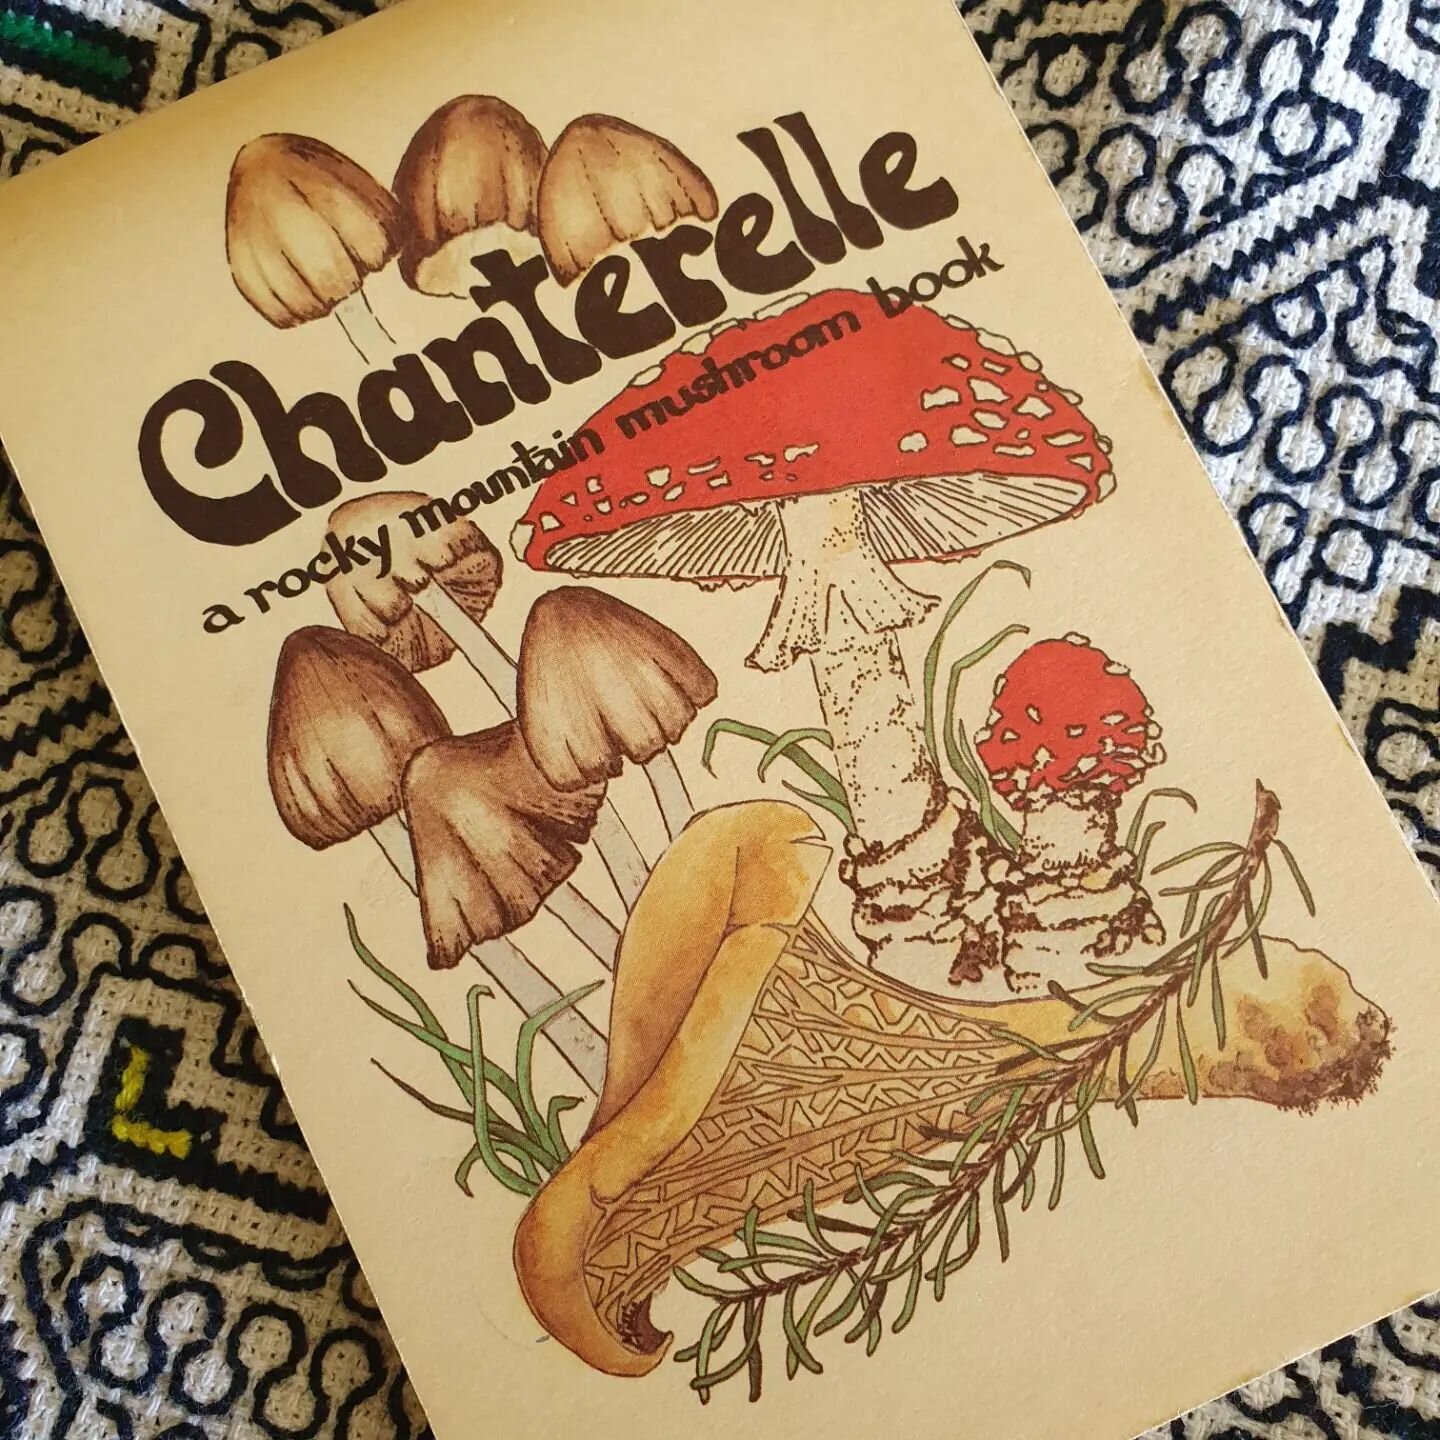 &quot;Chanterelle, a rocky mountain mushroom book&quot; by Millie Miller and Cyndi Nelson.

The gorgeous pocket sized notebook syle firaging guide was published in 1986 by Johnson Books in Boulder.

#guerrillamycology #mushrooms #fungiculture&nbsp; #